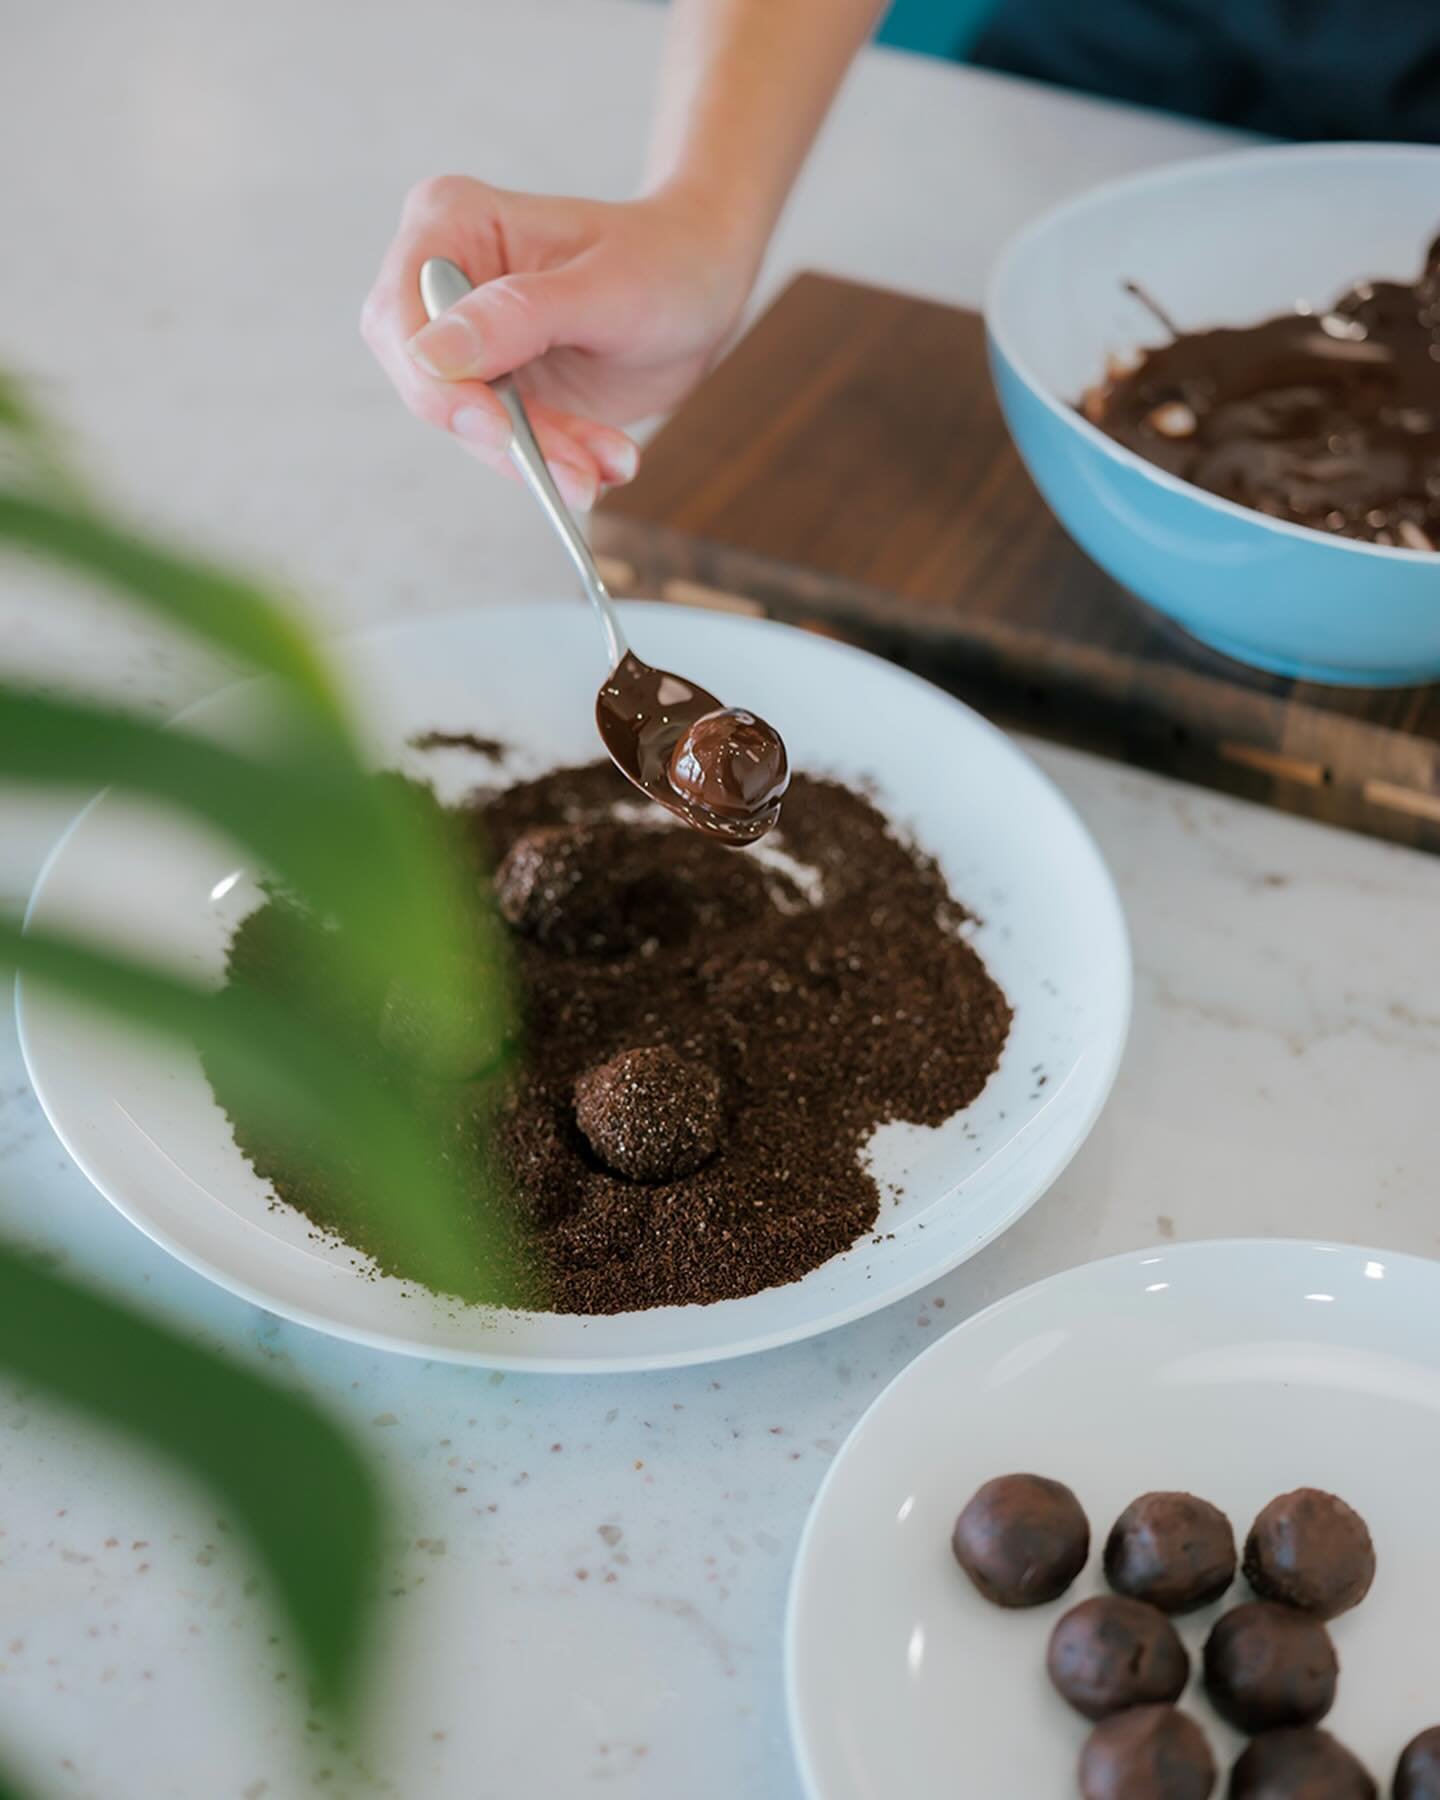 Indulge in decadence because it&rsquo;s National Truffle Day! Tag your truffle-loving partner who would love to celebrate this day with you (and would maybe be interested in taking The Hawaiian Chocolate Truffle Class with @bymelissameyer 👀)